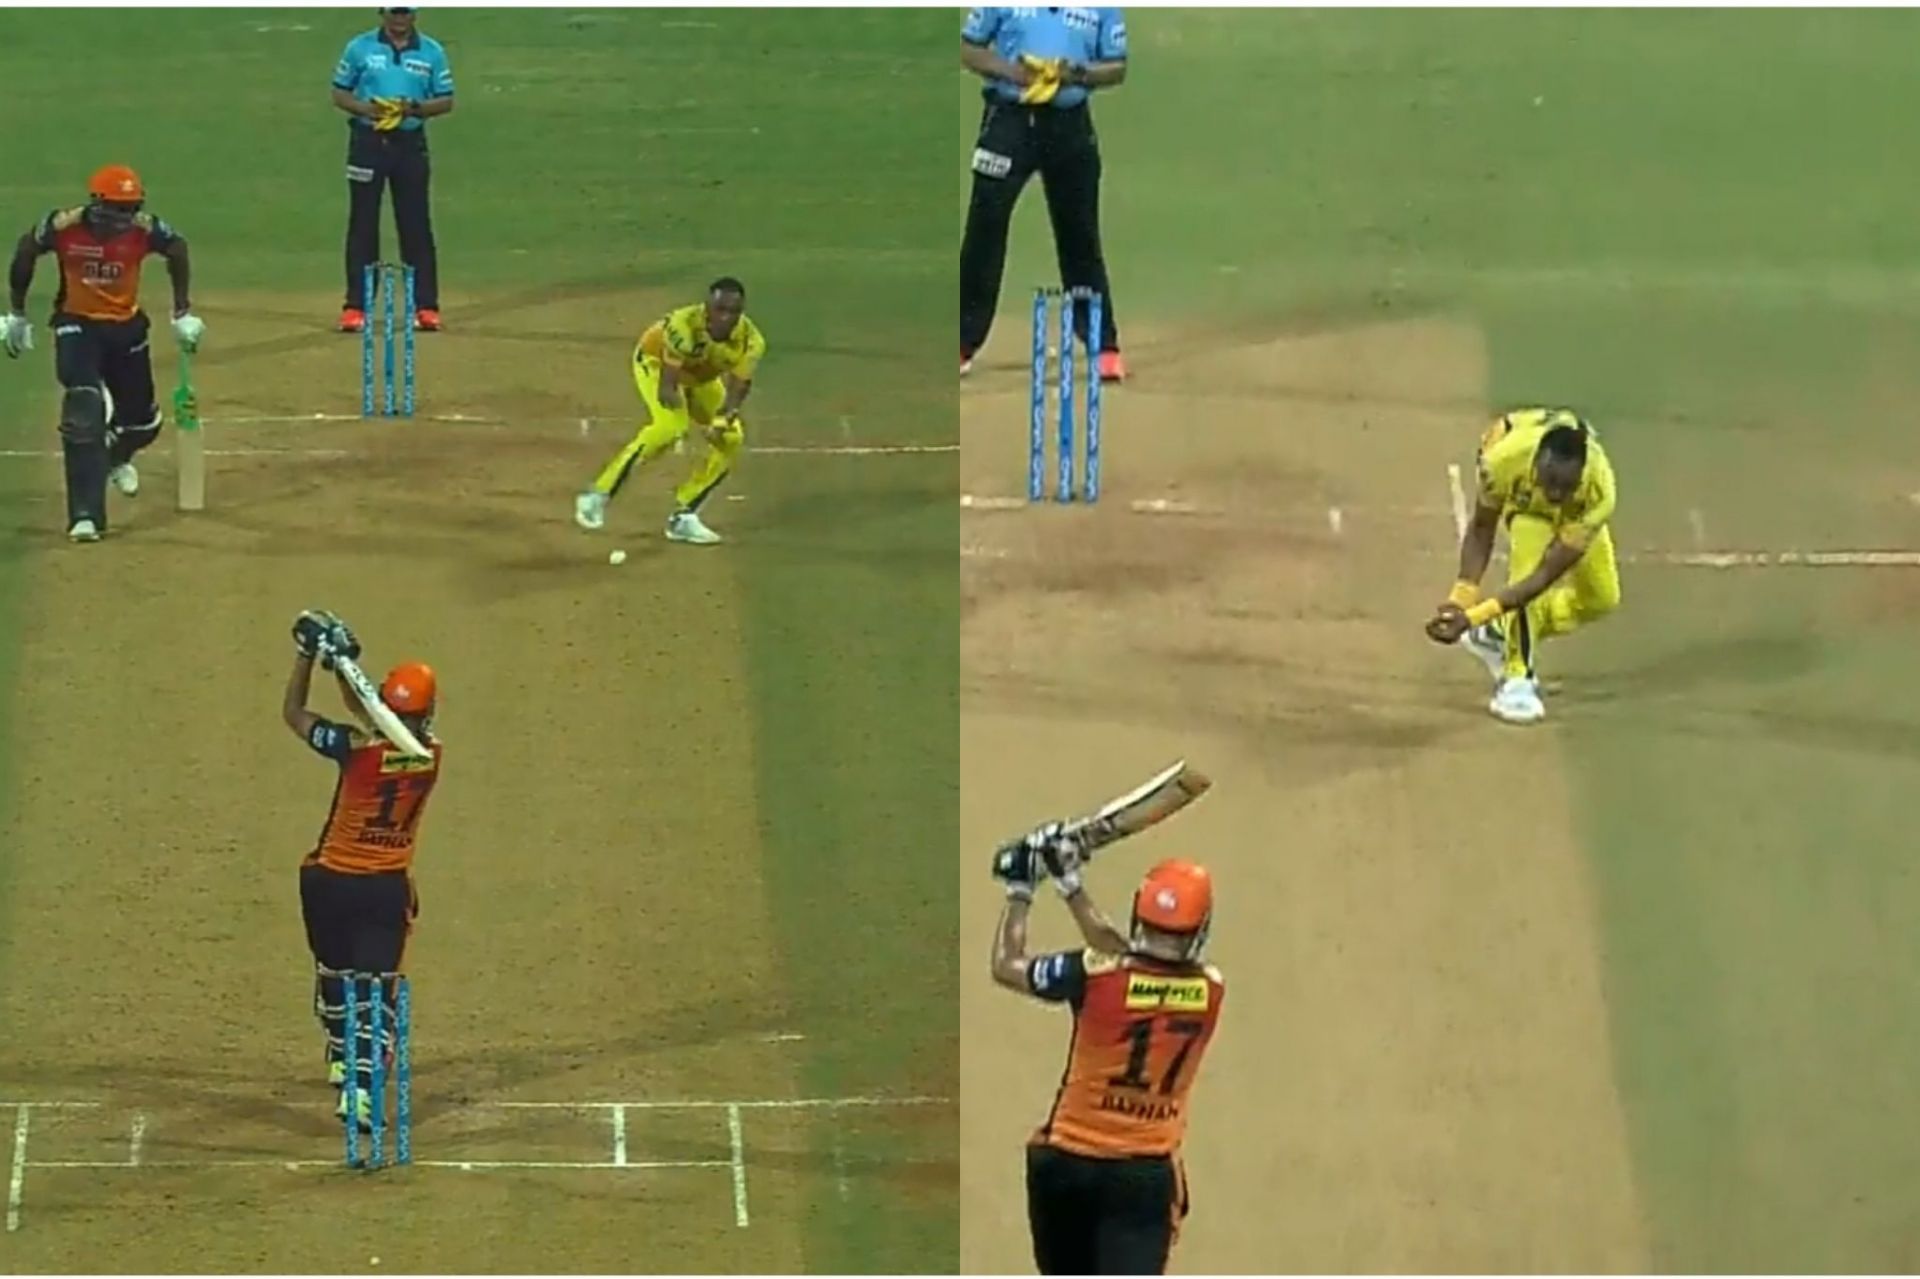 Dwayne Bravo taking a catch of his own bowling [IPLT20]